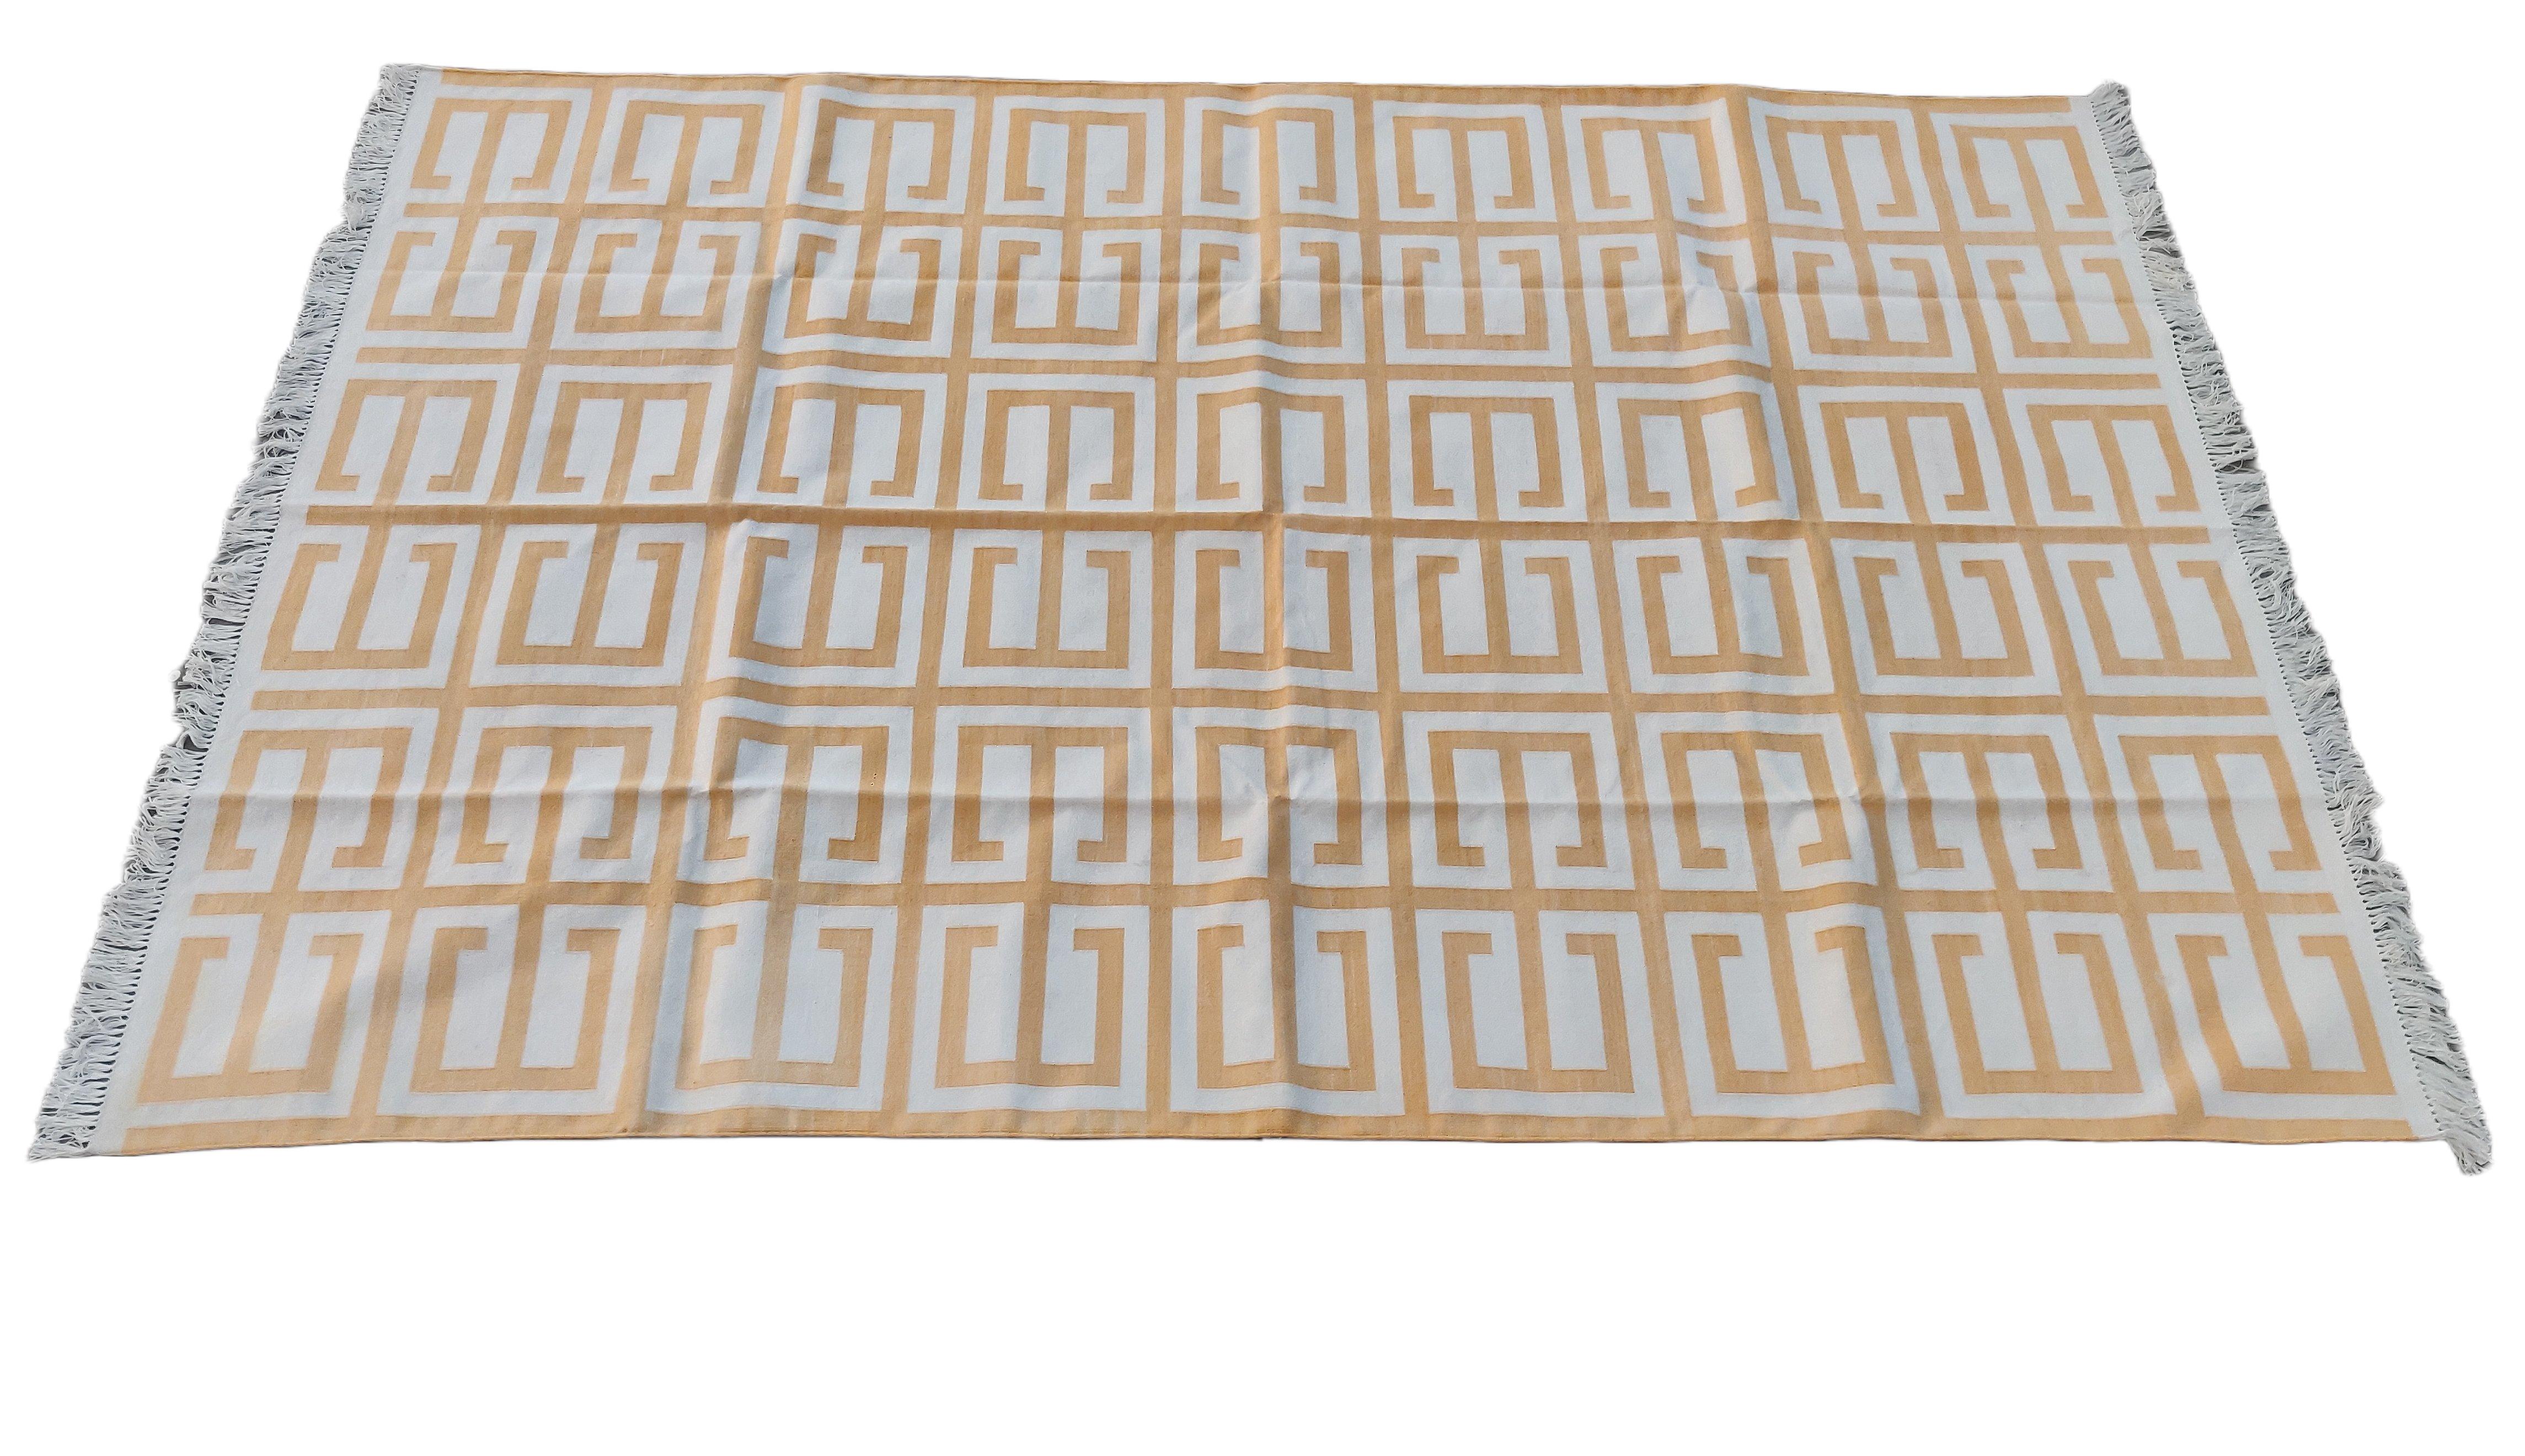 Hand-Woven Handmade Cotton Area Flat Weave Rug, 6x9 Yellow, White Geometric Indian Dhurrie For Sale